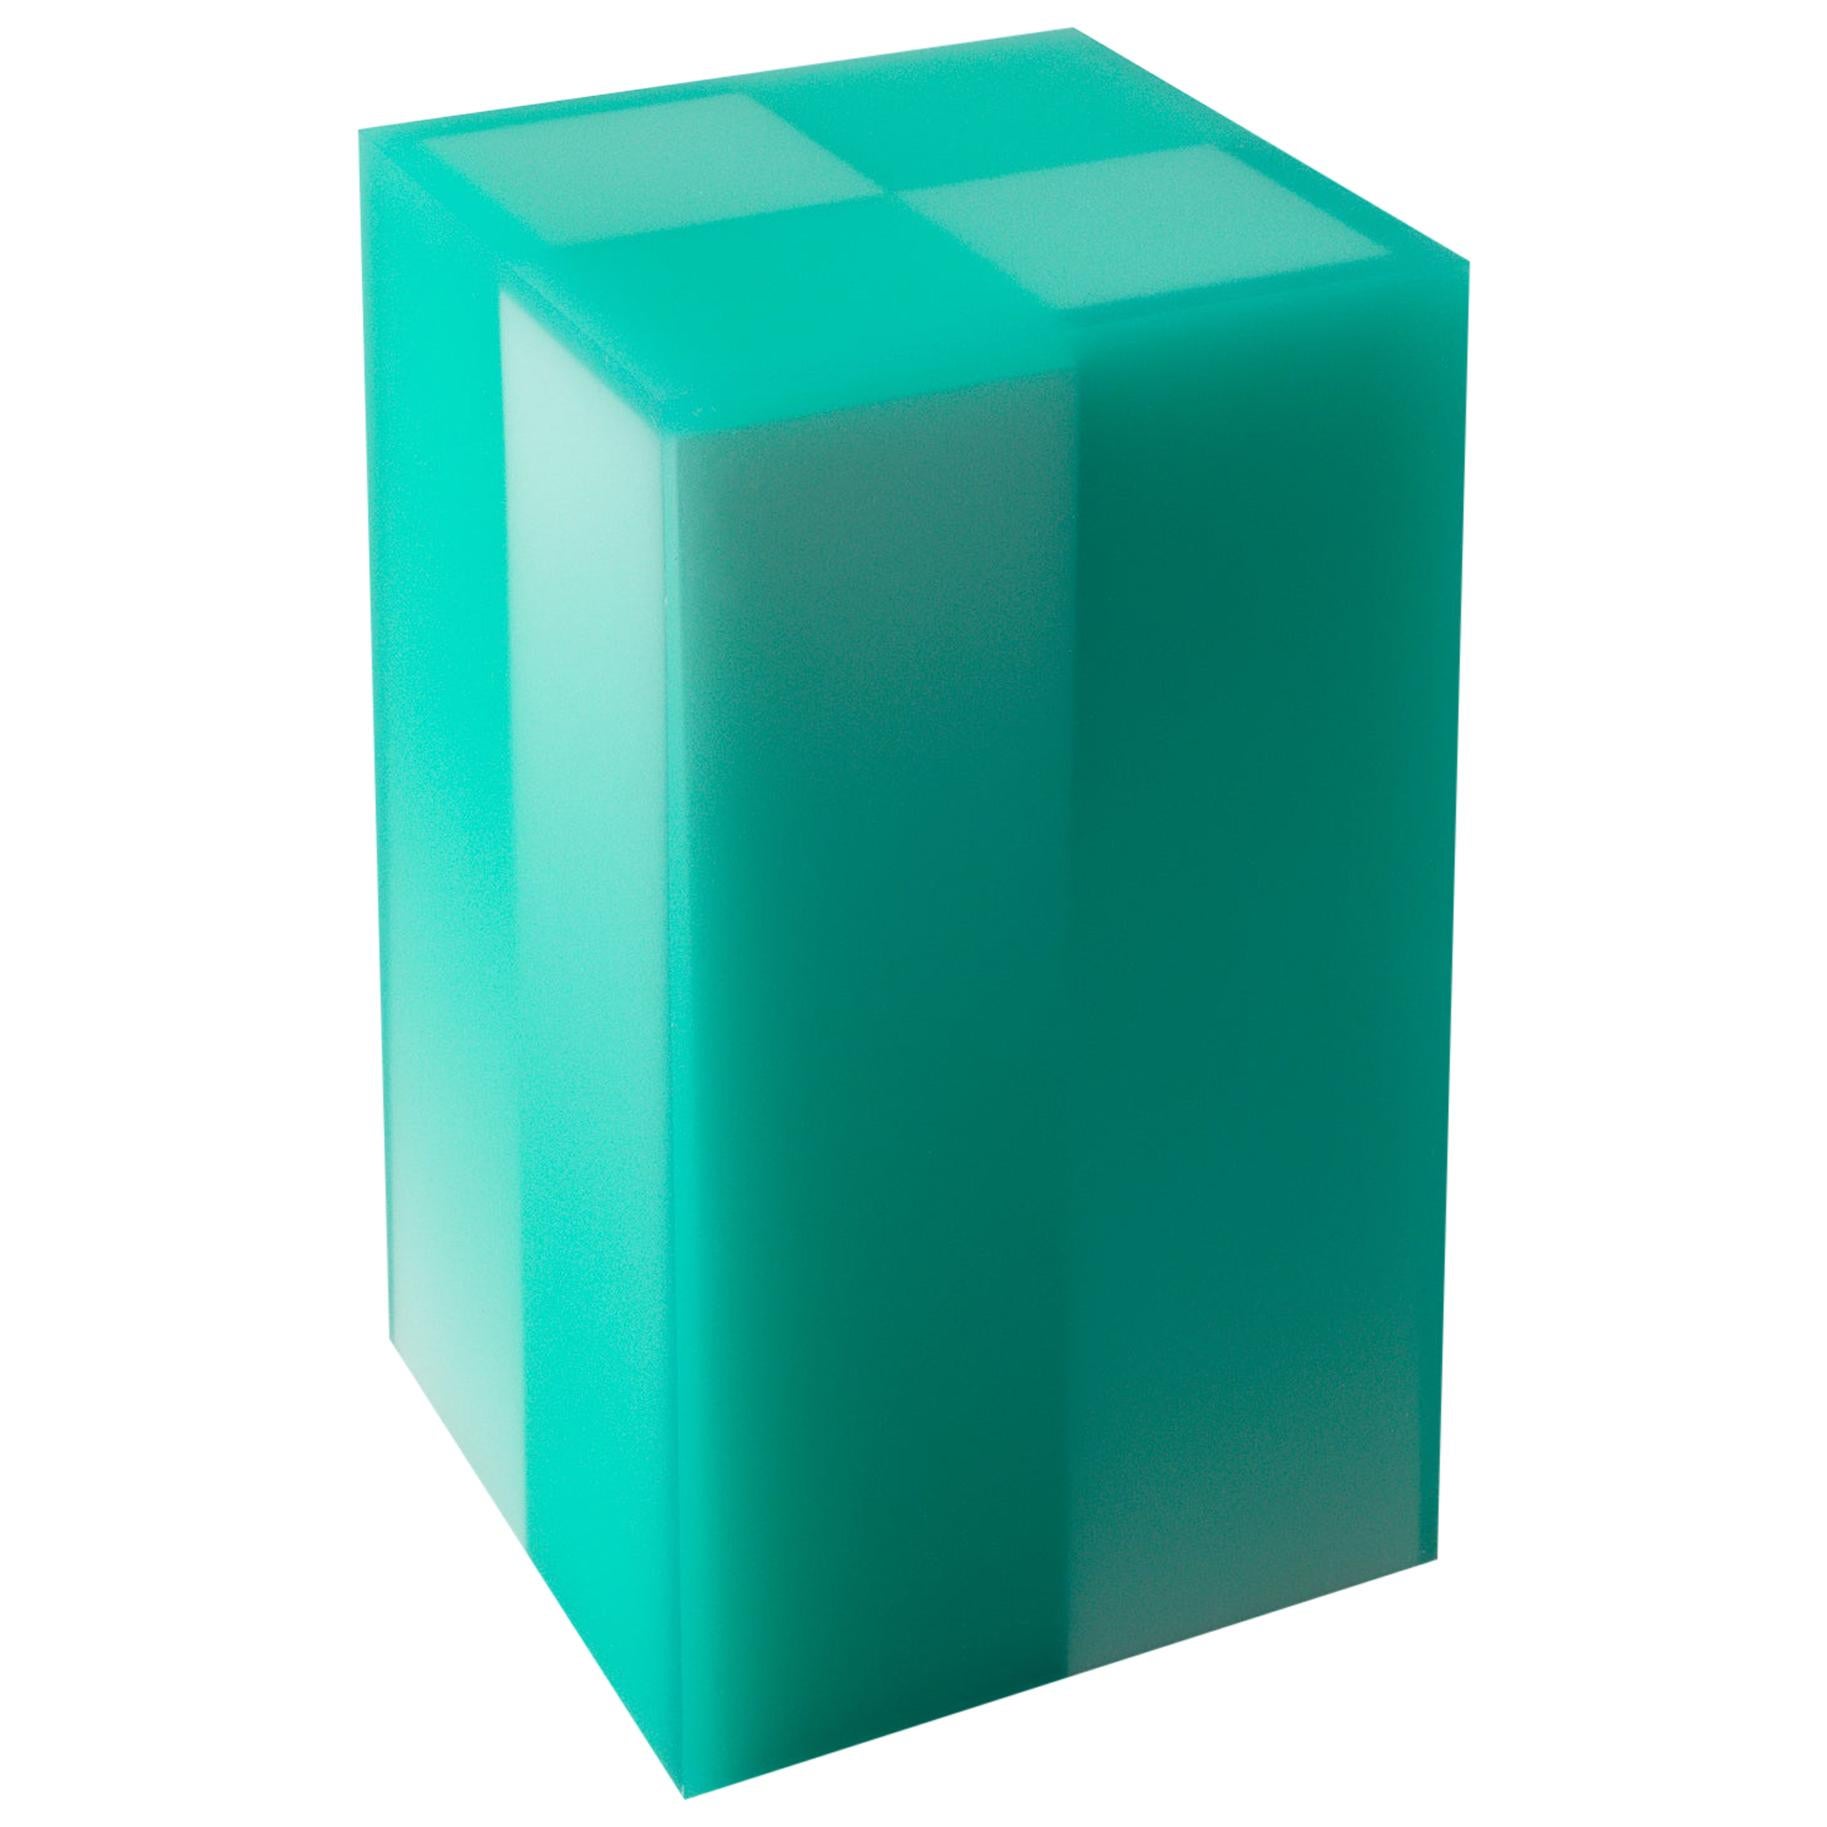 Four Way Shift Resin Side Table/Stool Turquoise by Facture REPby Tuleste Factory